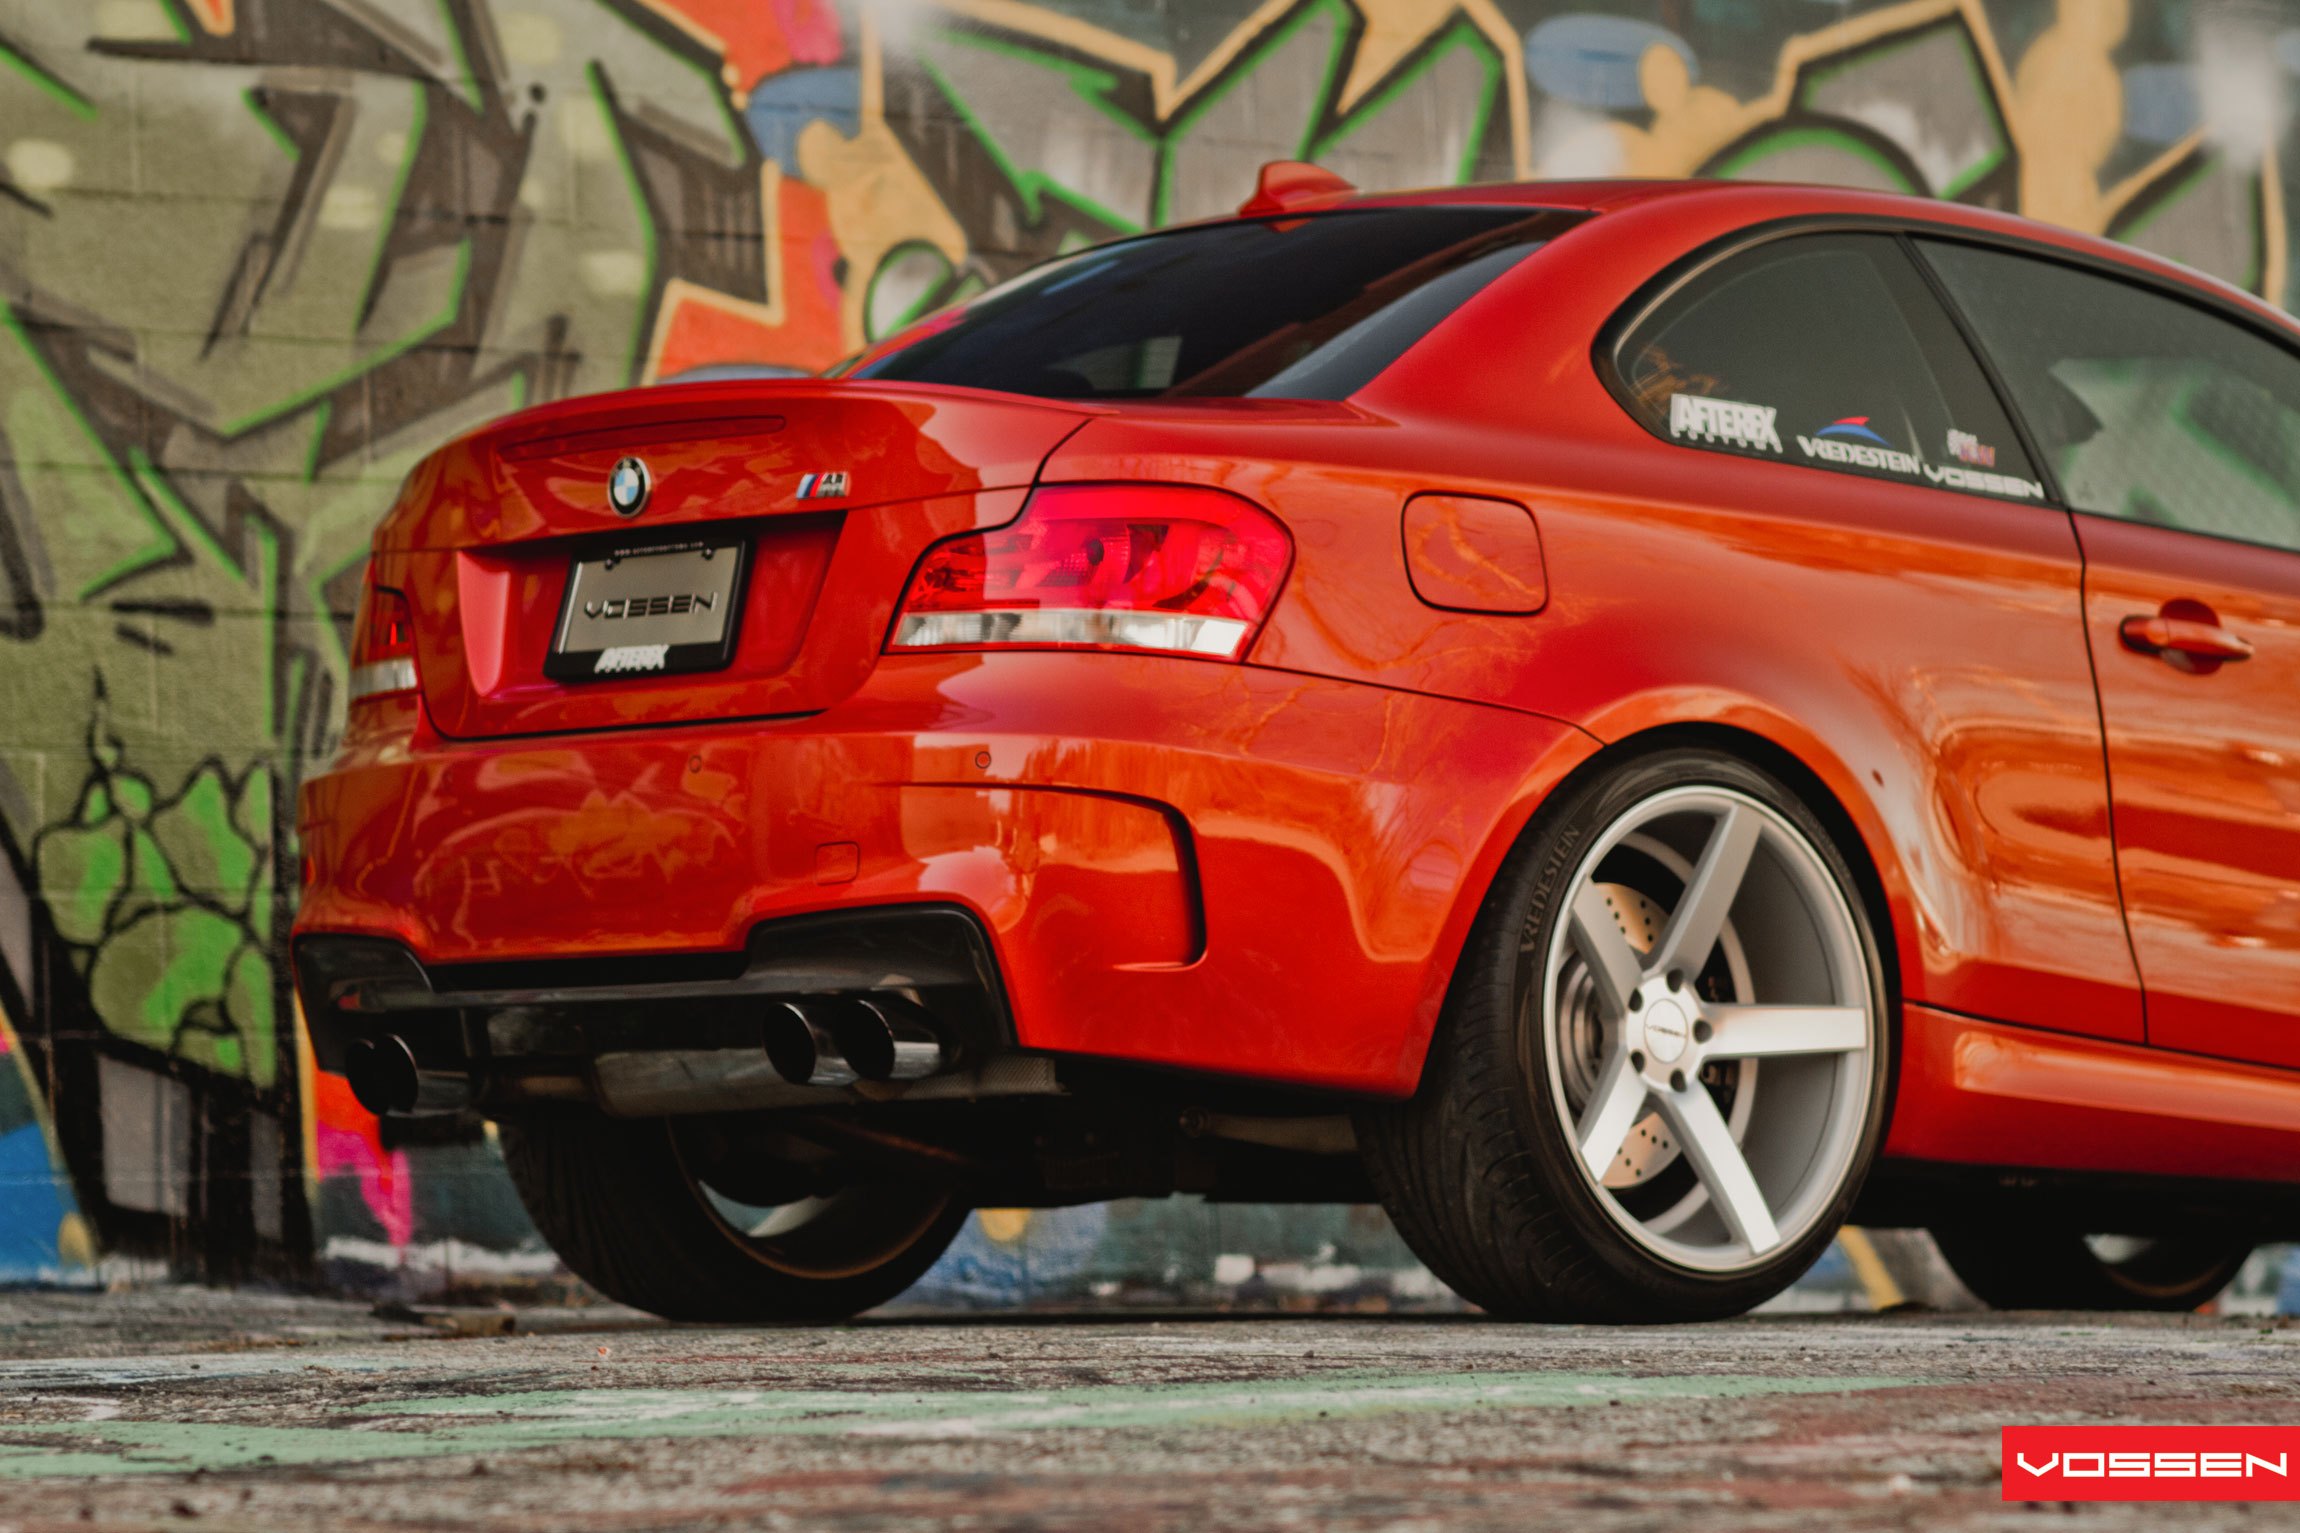 Rear Diffuser with Dual Exhaust Tips on BMW 1-Series - Photo by Vossen